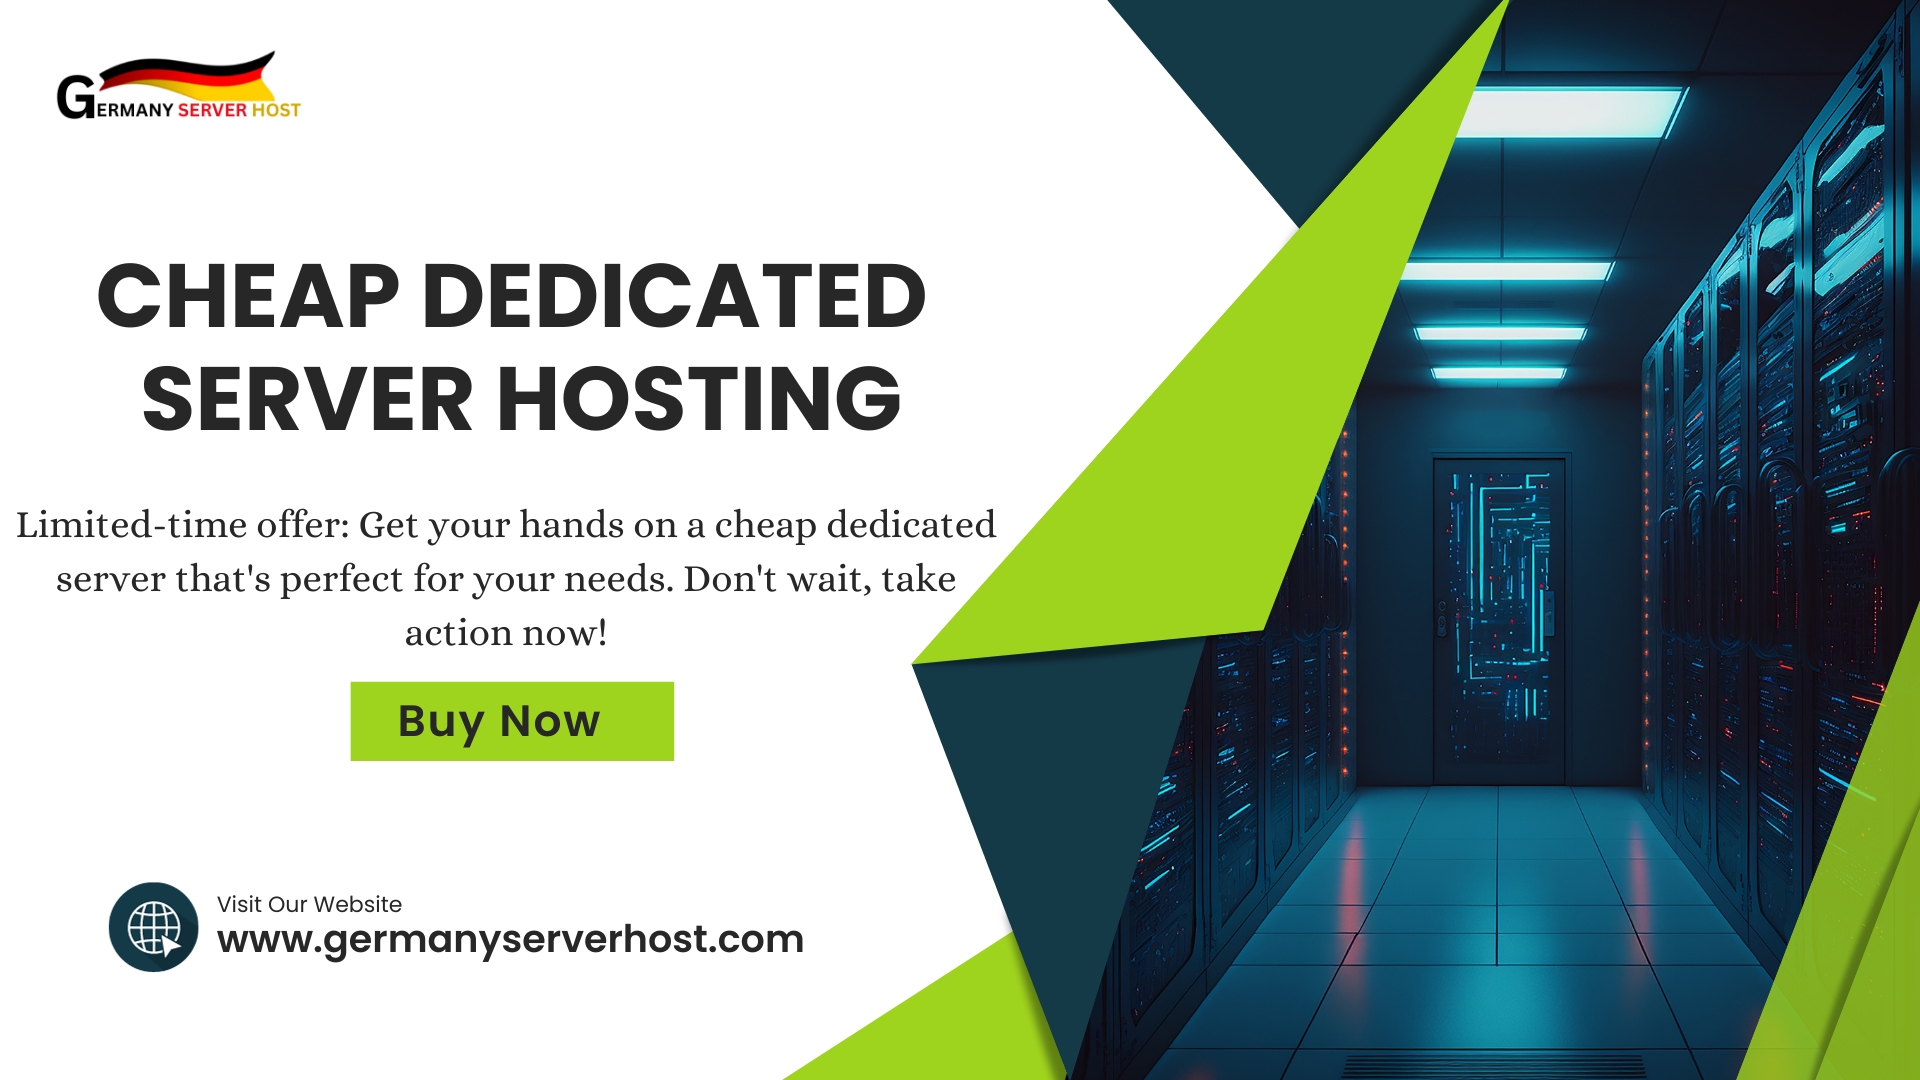 Don't Miss Out! Affordable Cheap Dedicated Server Hosting